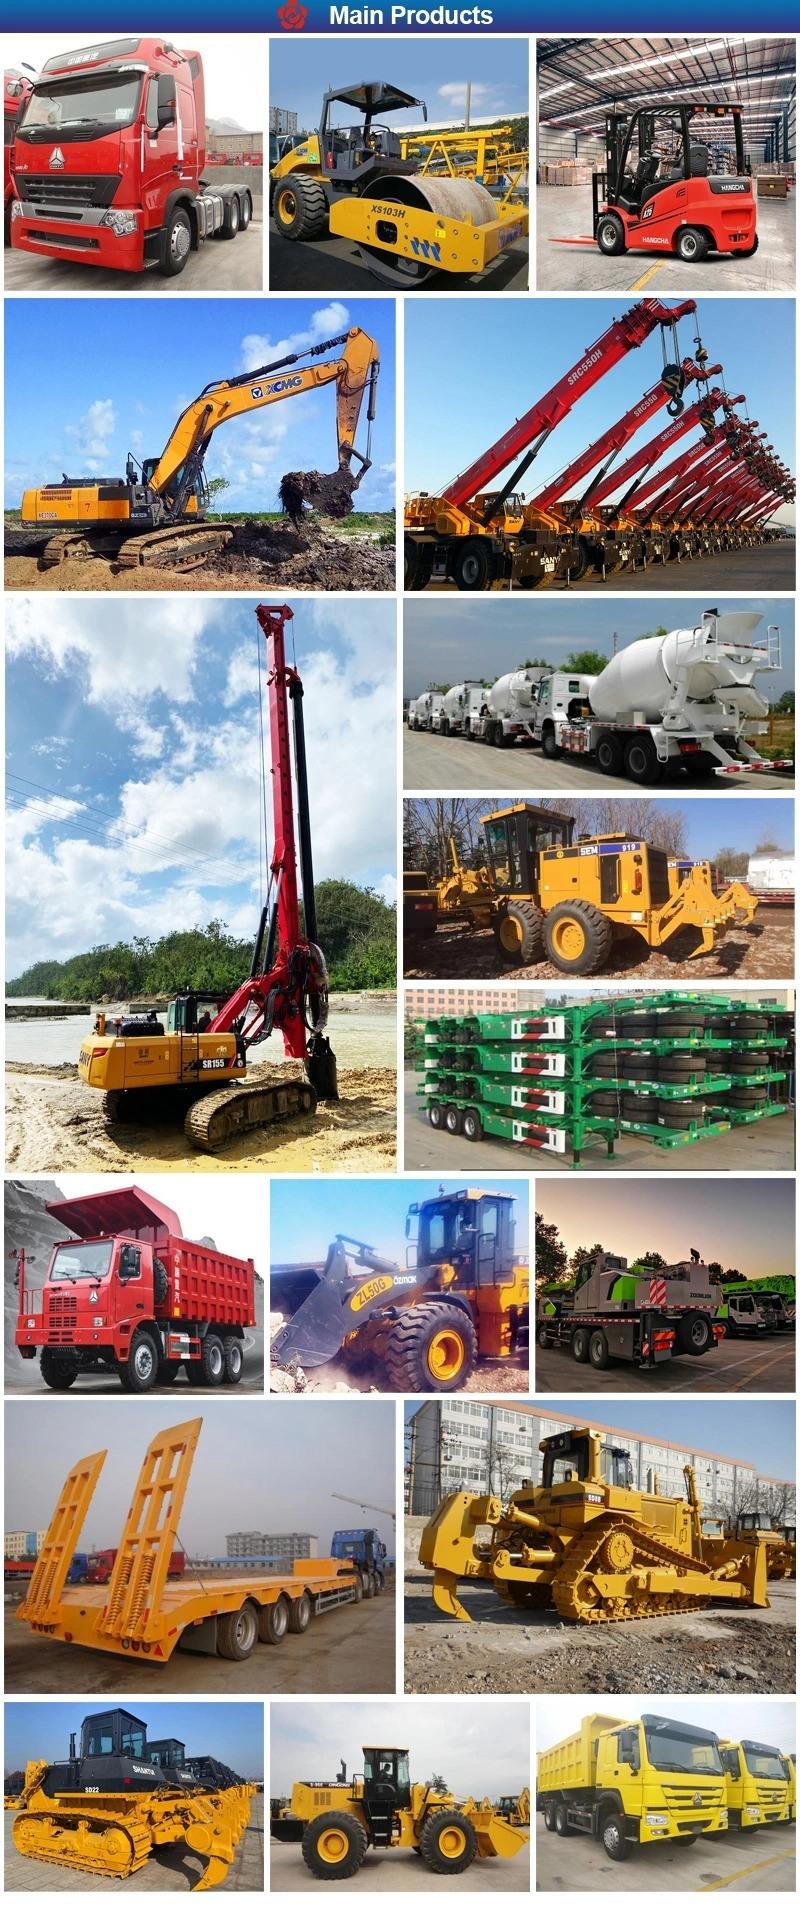 Sem/Shantui/ /Liugong/Sdlg/Longking/Sanyi/Sunward/Changlin Motor Grader 918/919/921/170/190/230 with Ripper and Grader Blade and Tandem Axle on Promotion